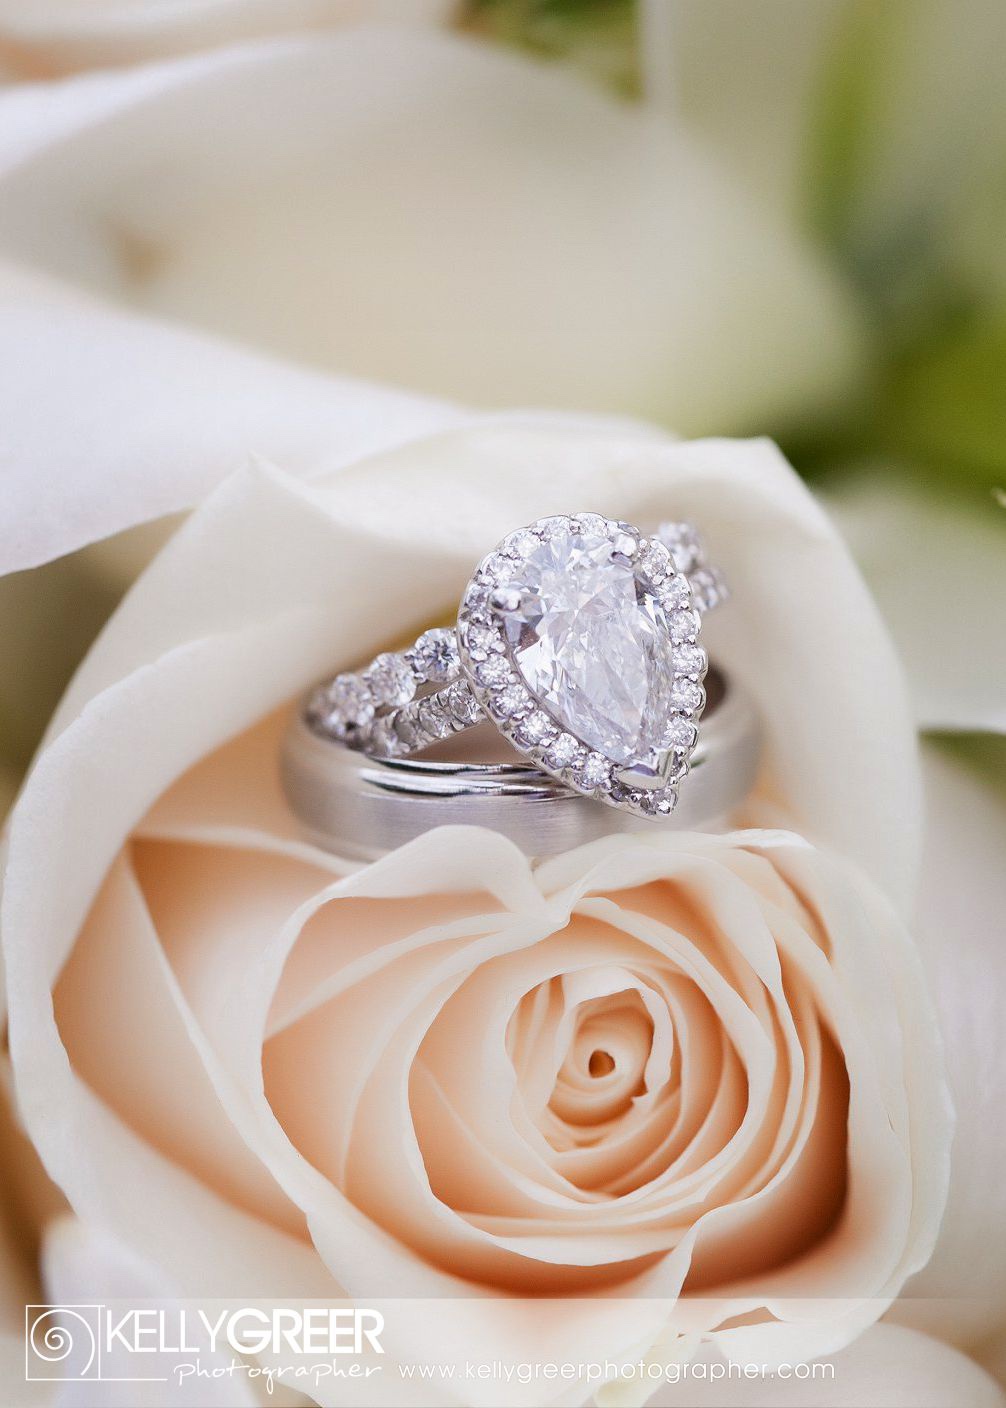 st Croix Weddings - The Engagement Ring Blog | Kelly Greer Photographer